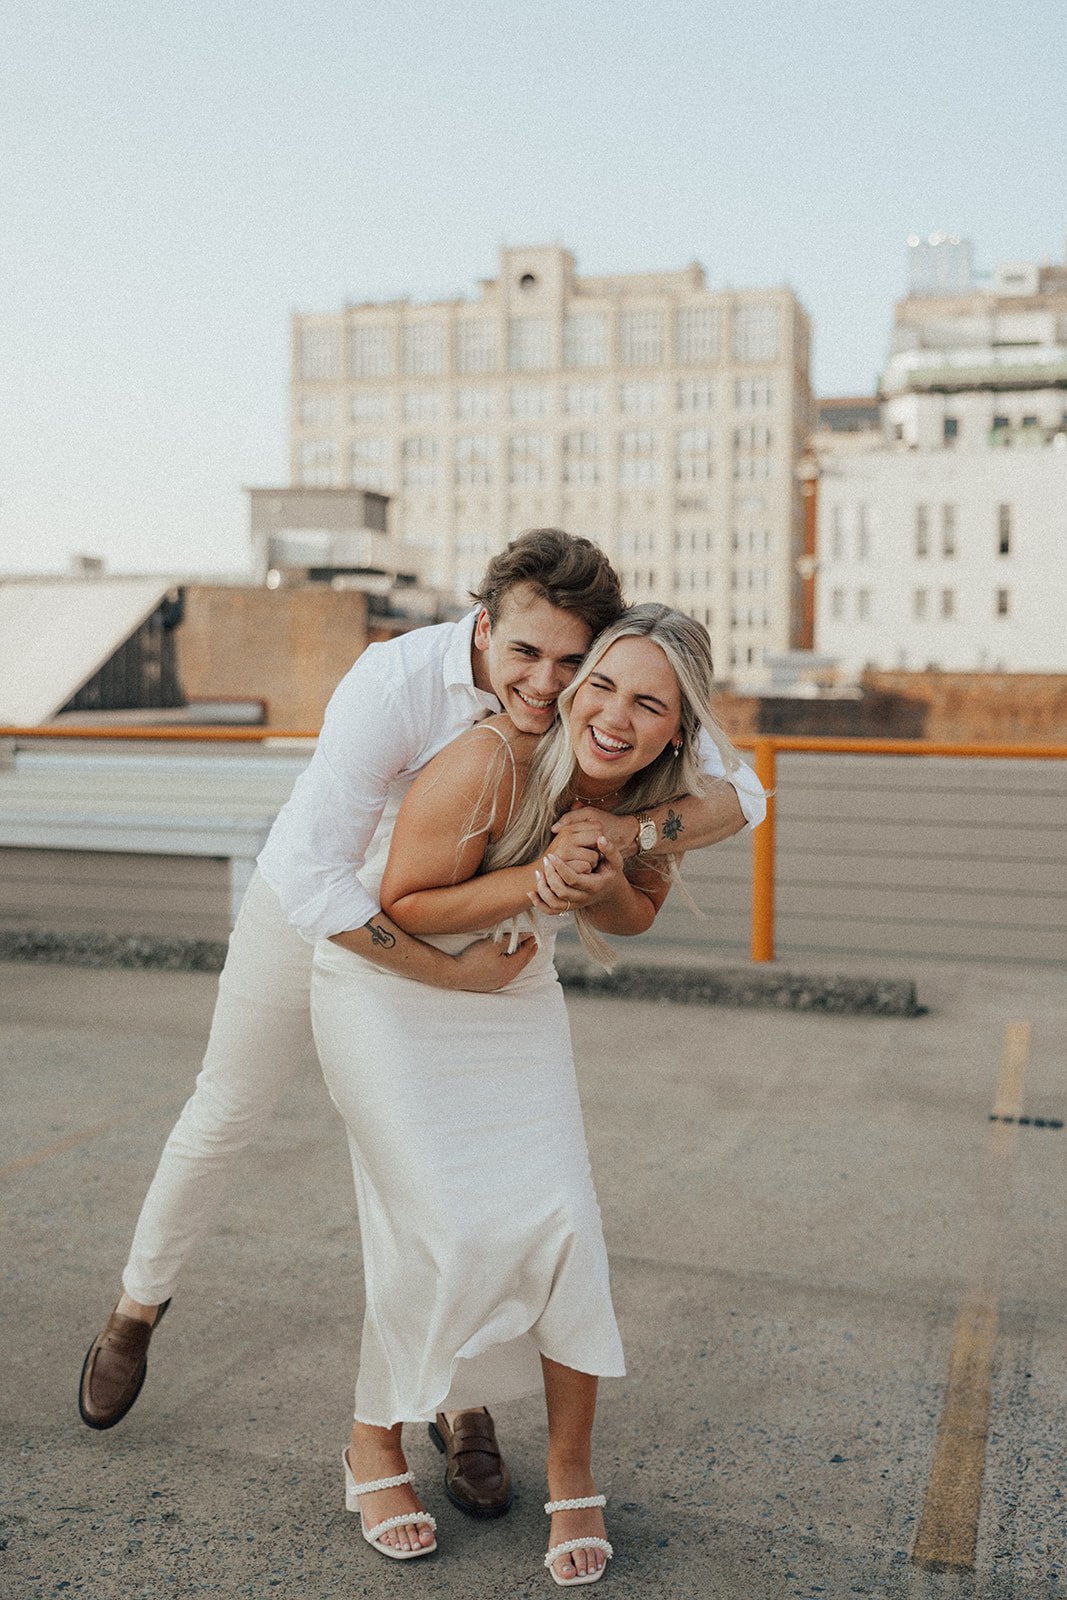 hannah-and-trey-parking-can-be-fun-downtown-memphis-river-walk-mississippi-beach-tennessee-wedding-photographer-jo-darling-photography-73.jpg